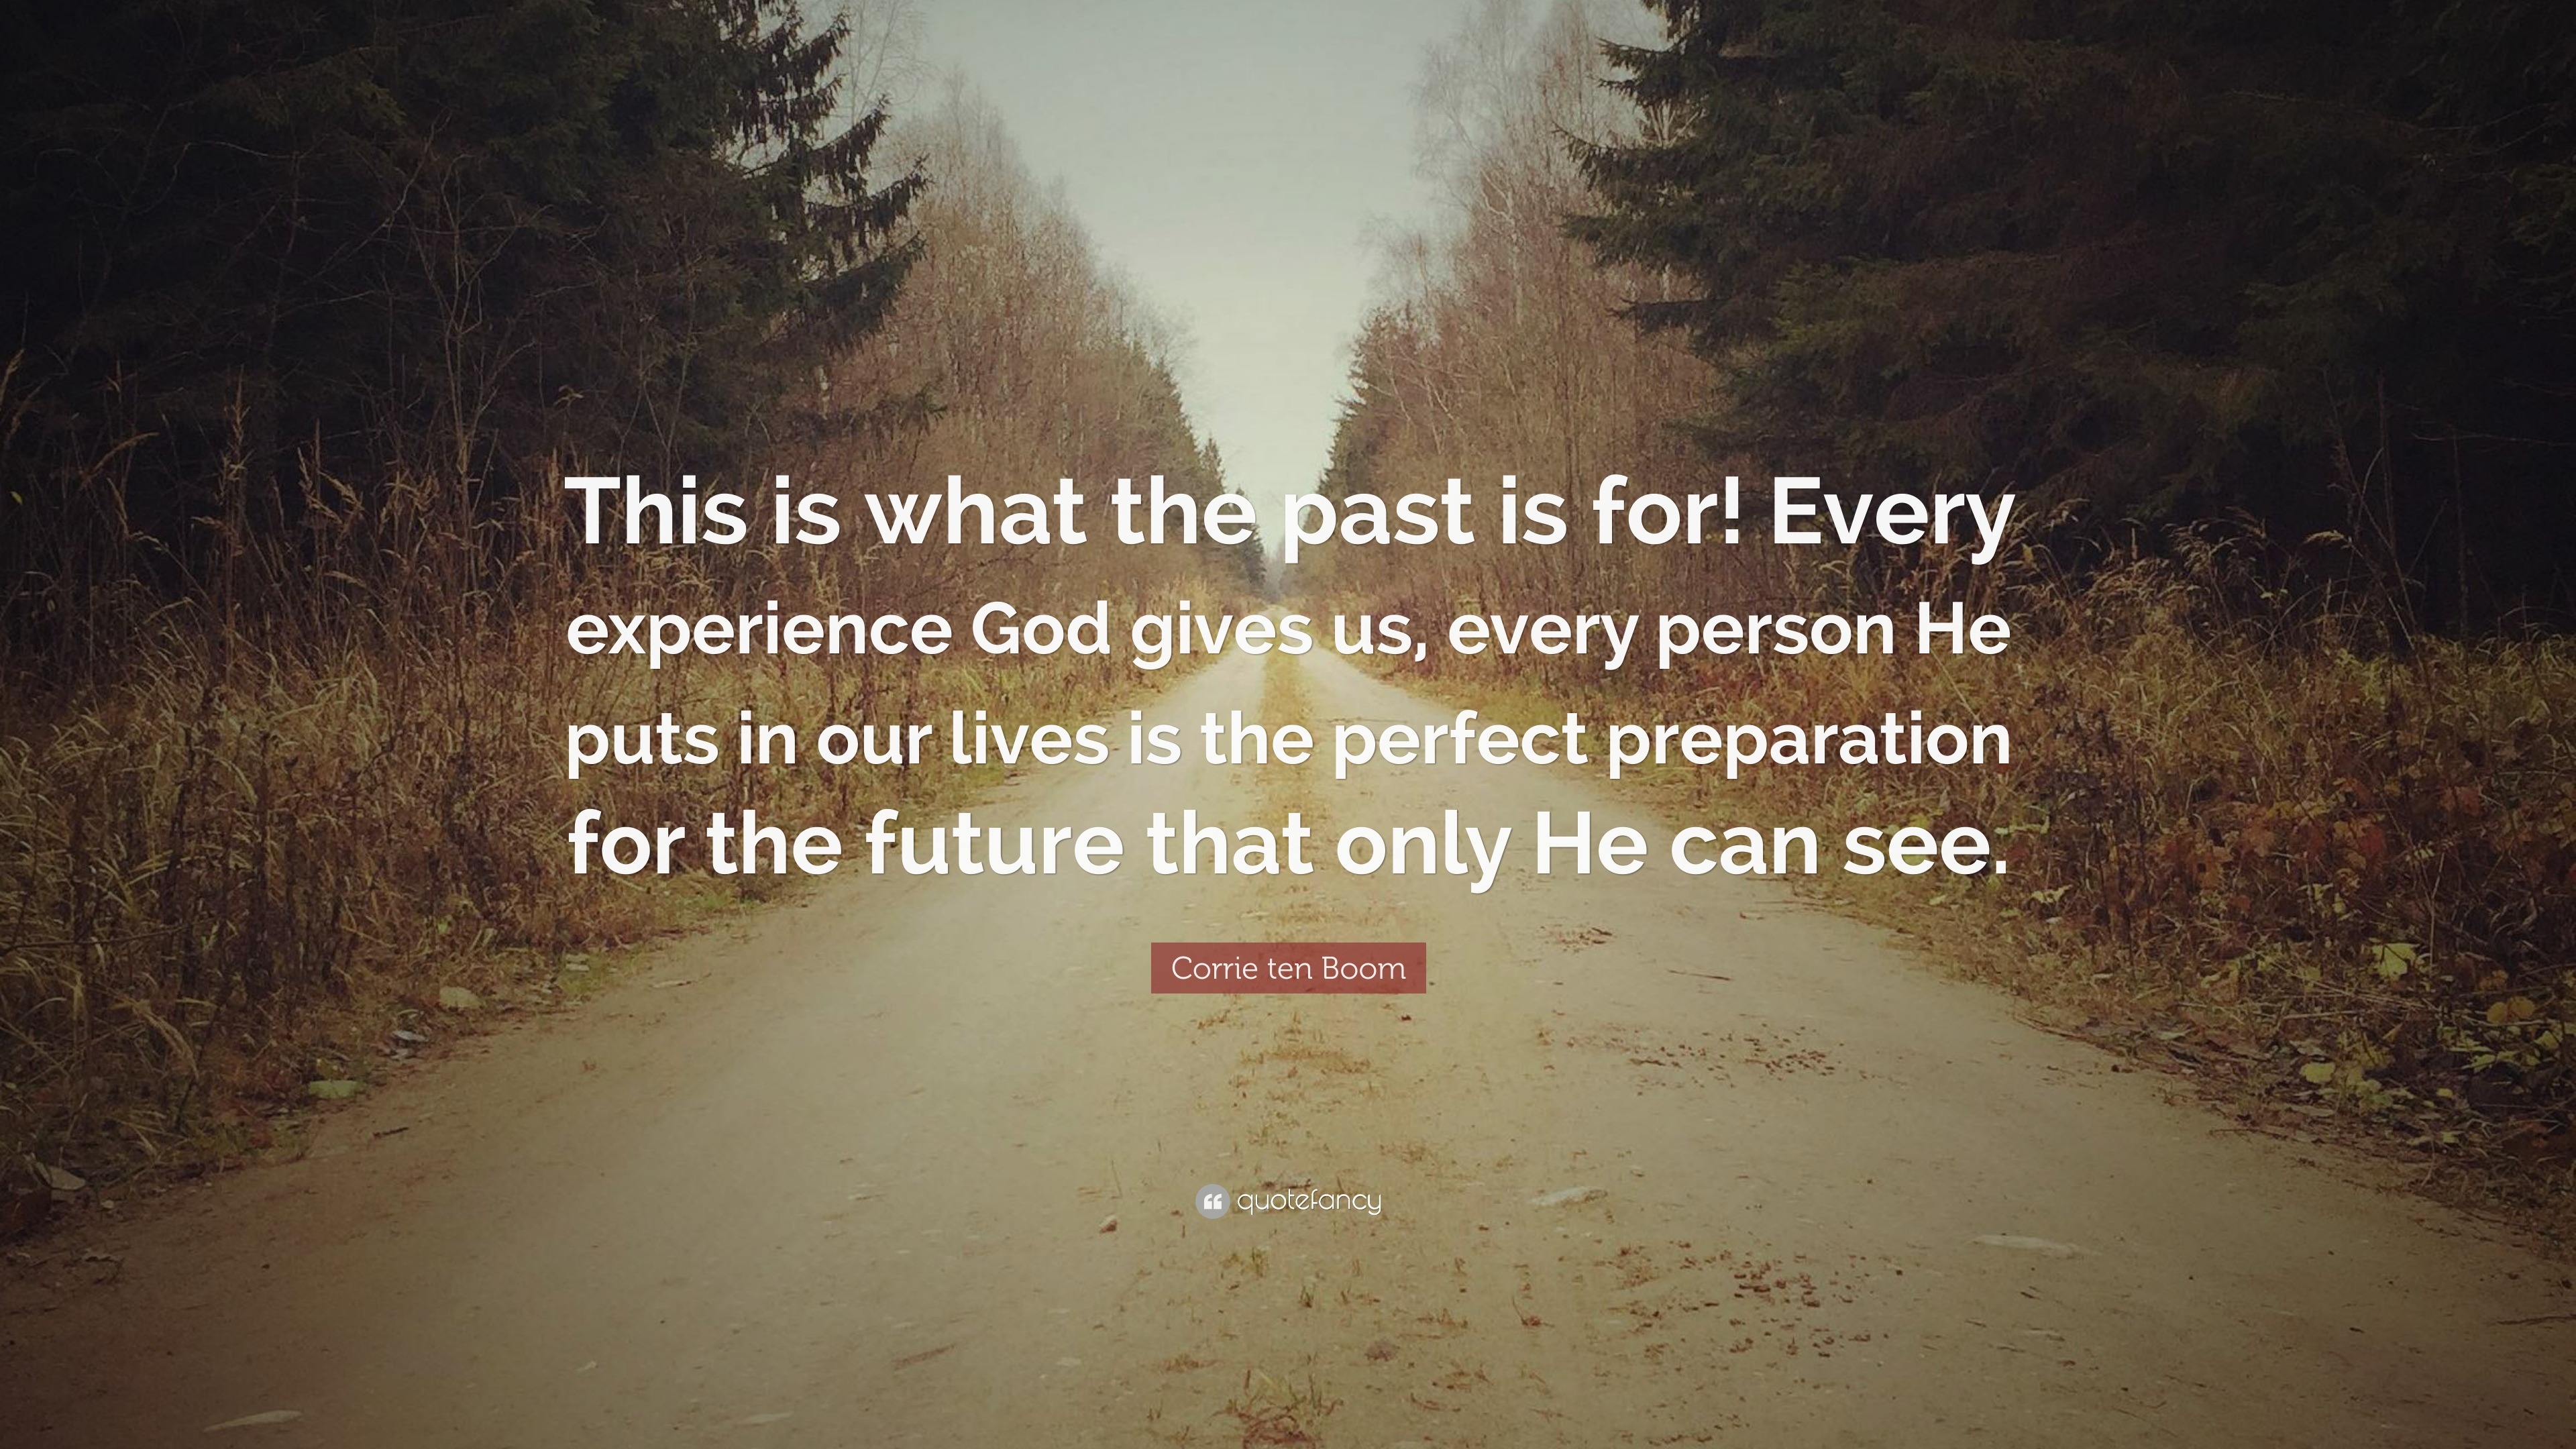 Corrie Ten Boom - God takes our sins – the past, present and